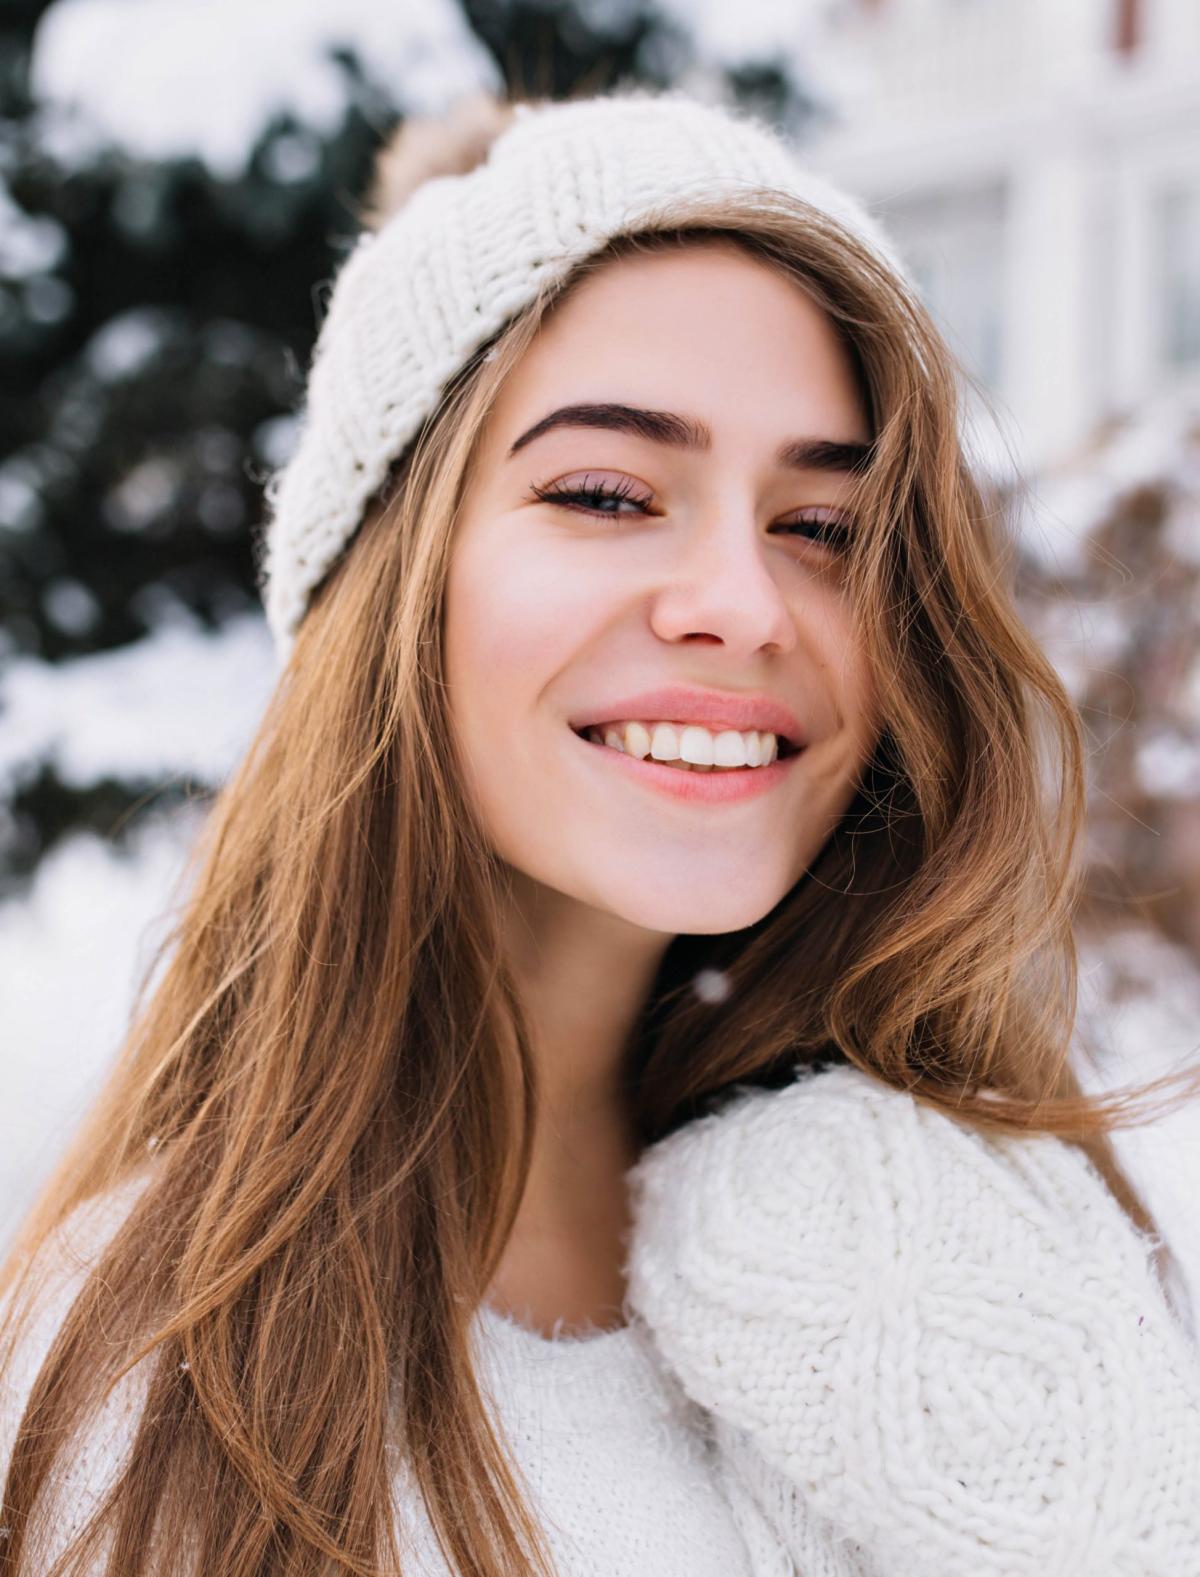 FOODS AND TREATMENTS FOR STRONG, HEALTHY HAIR EVEN IN WINTER.